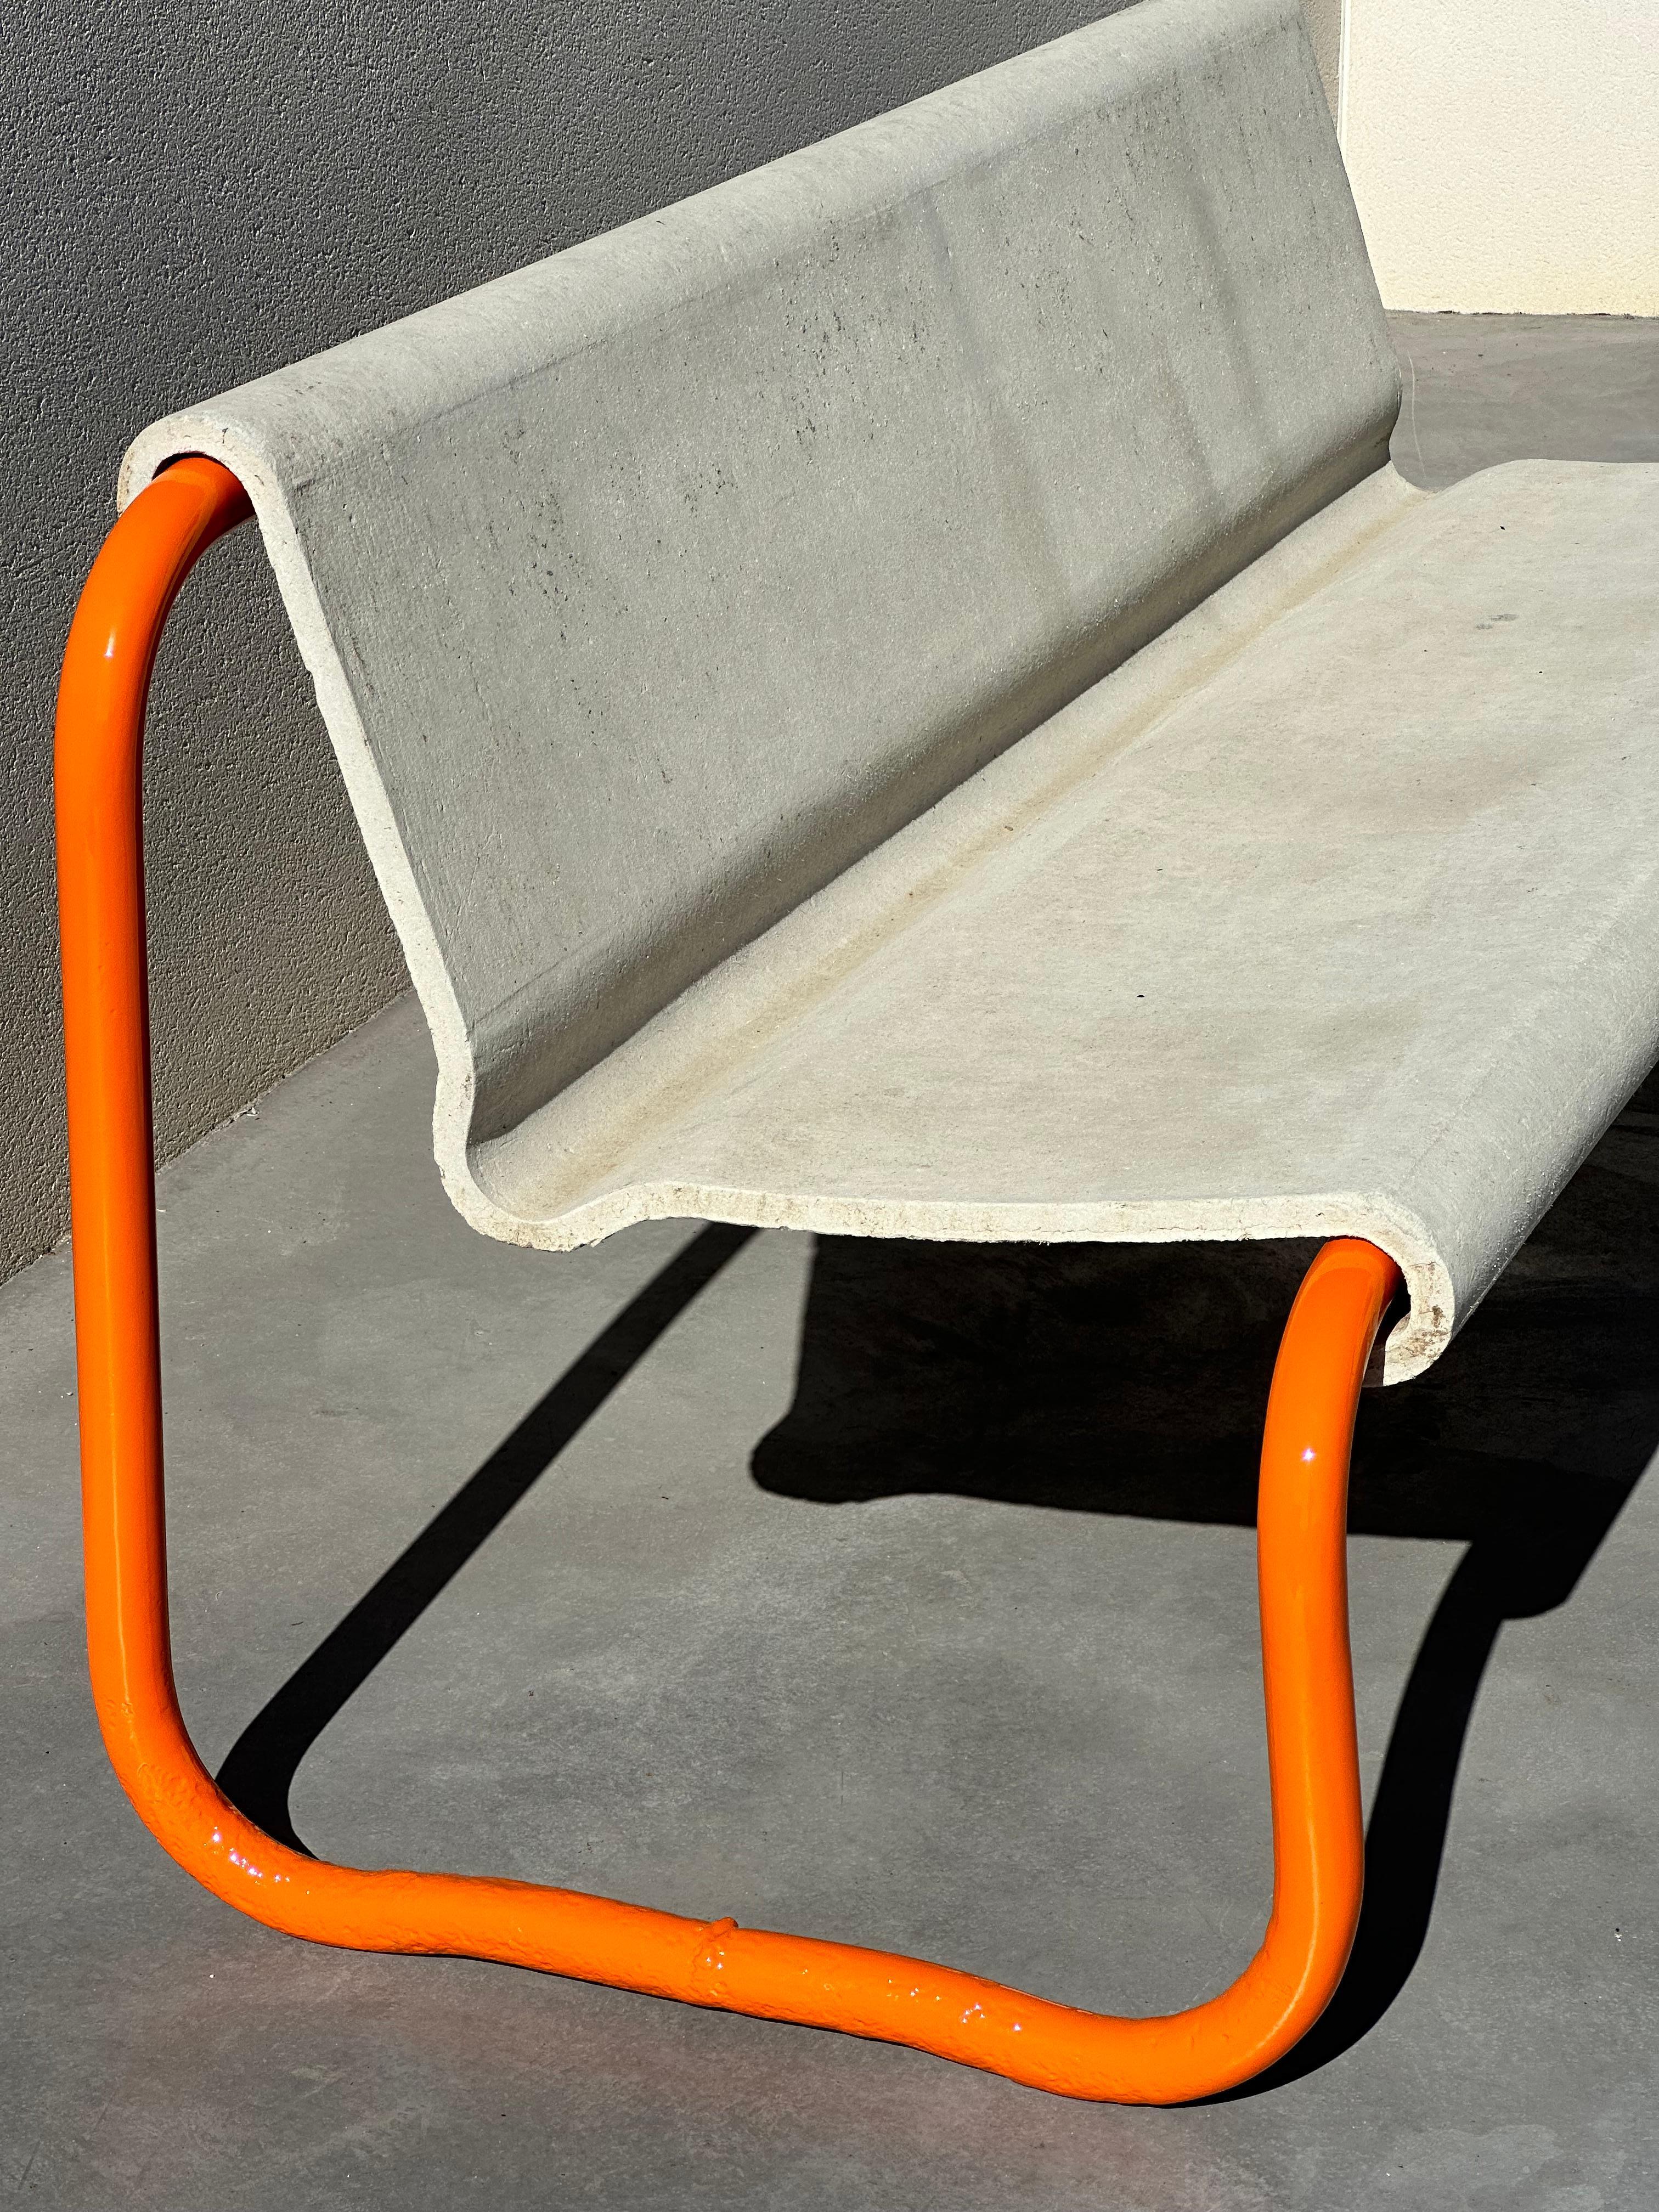 Willy Guhl Steel and Concrete Design Bench, Switzerland, 1950s For Sale 4